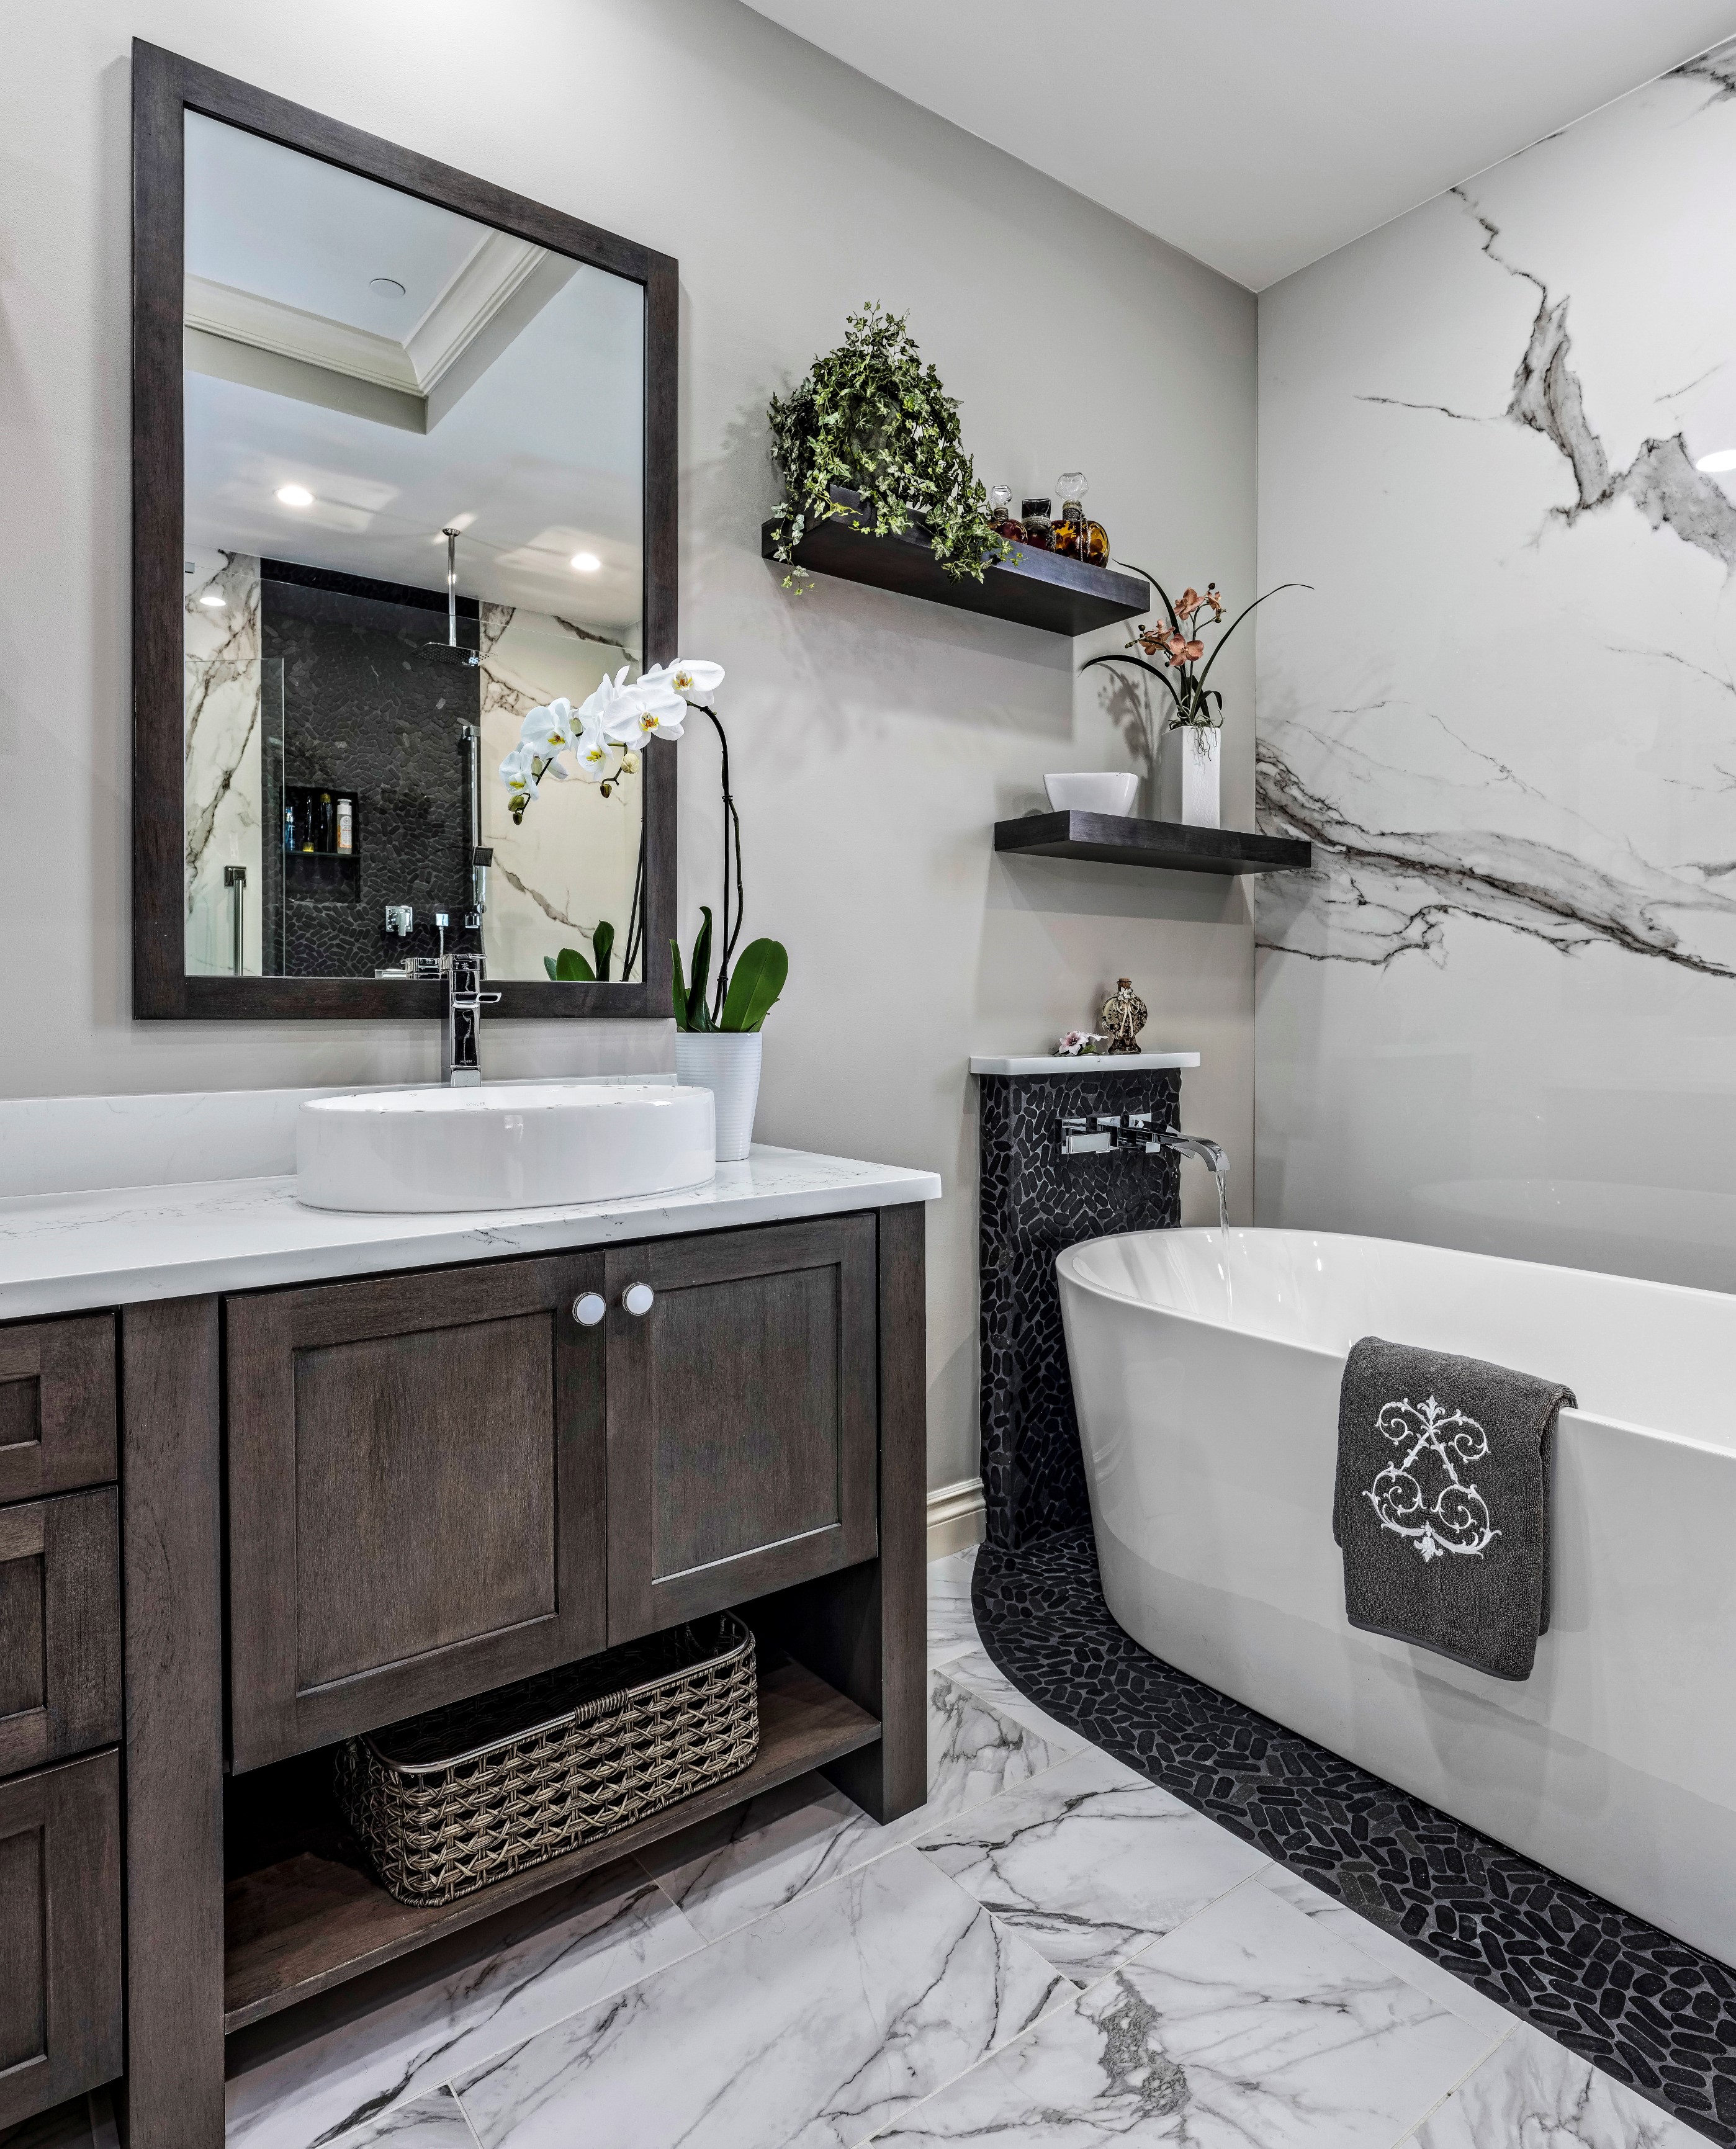 Bathroom Remodeling Typically Cost, How Much To Redo A Bathroom